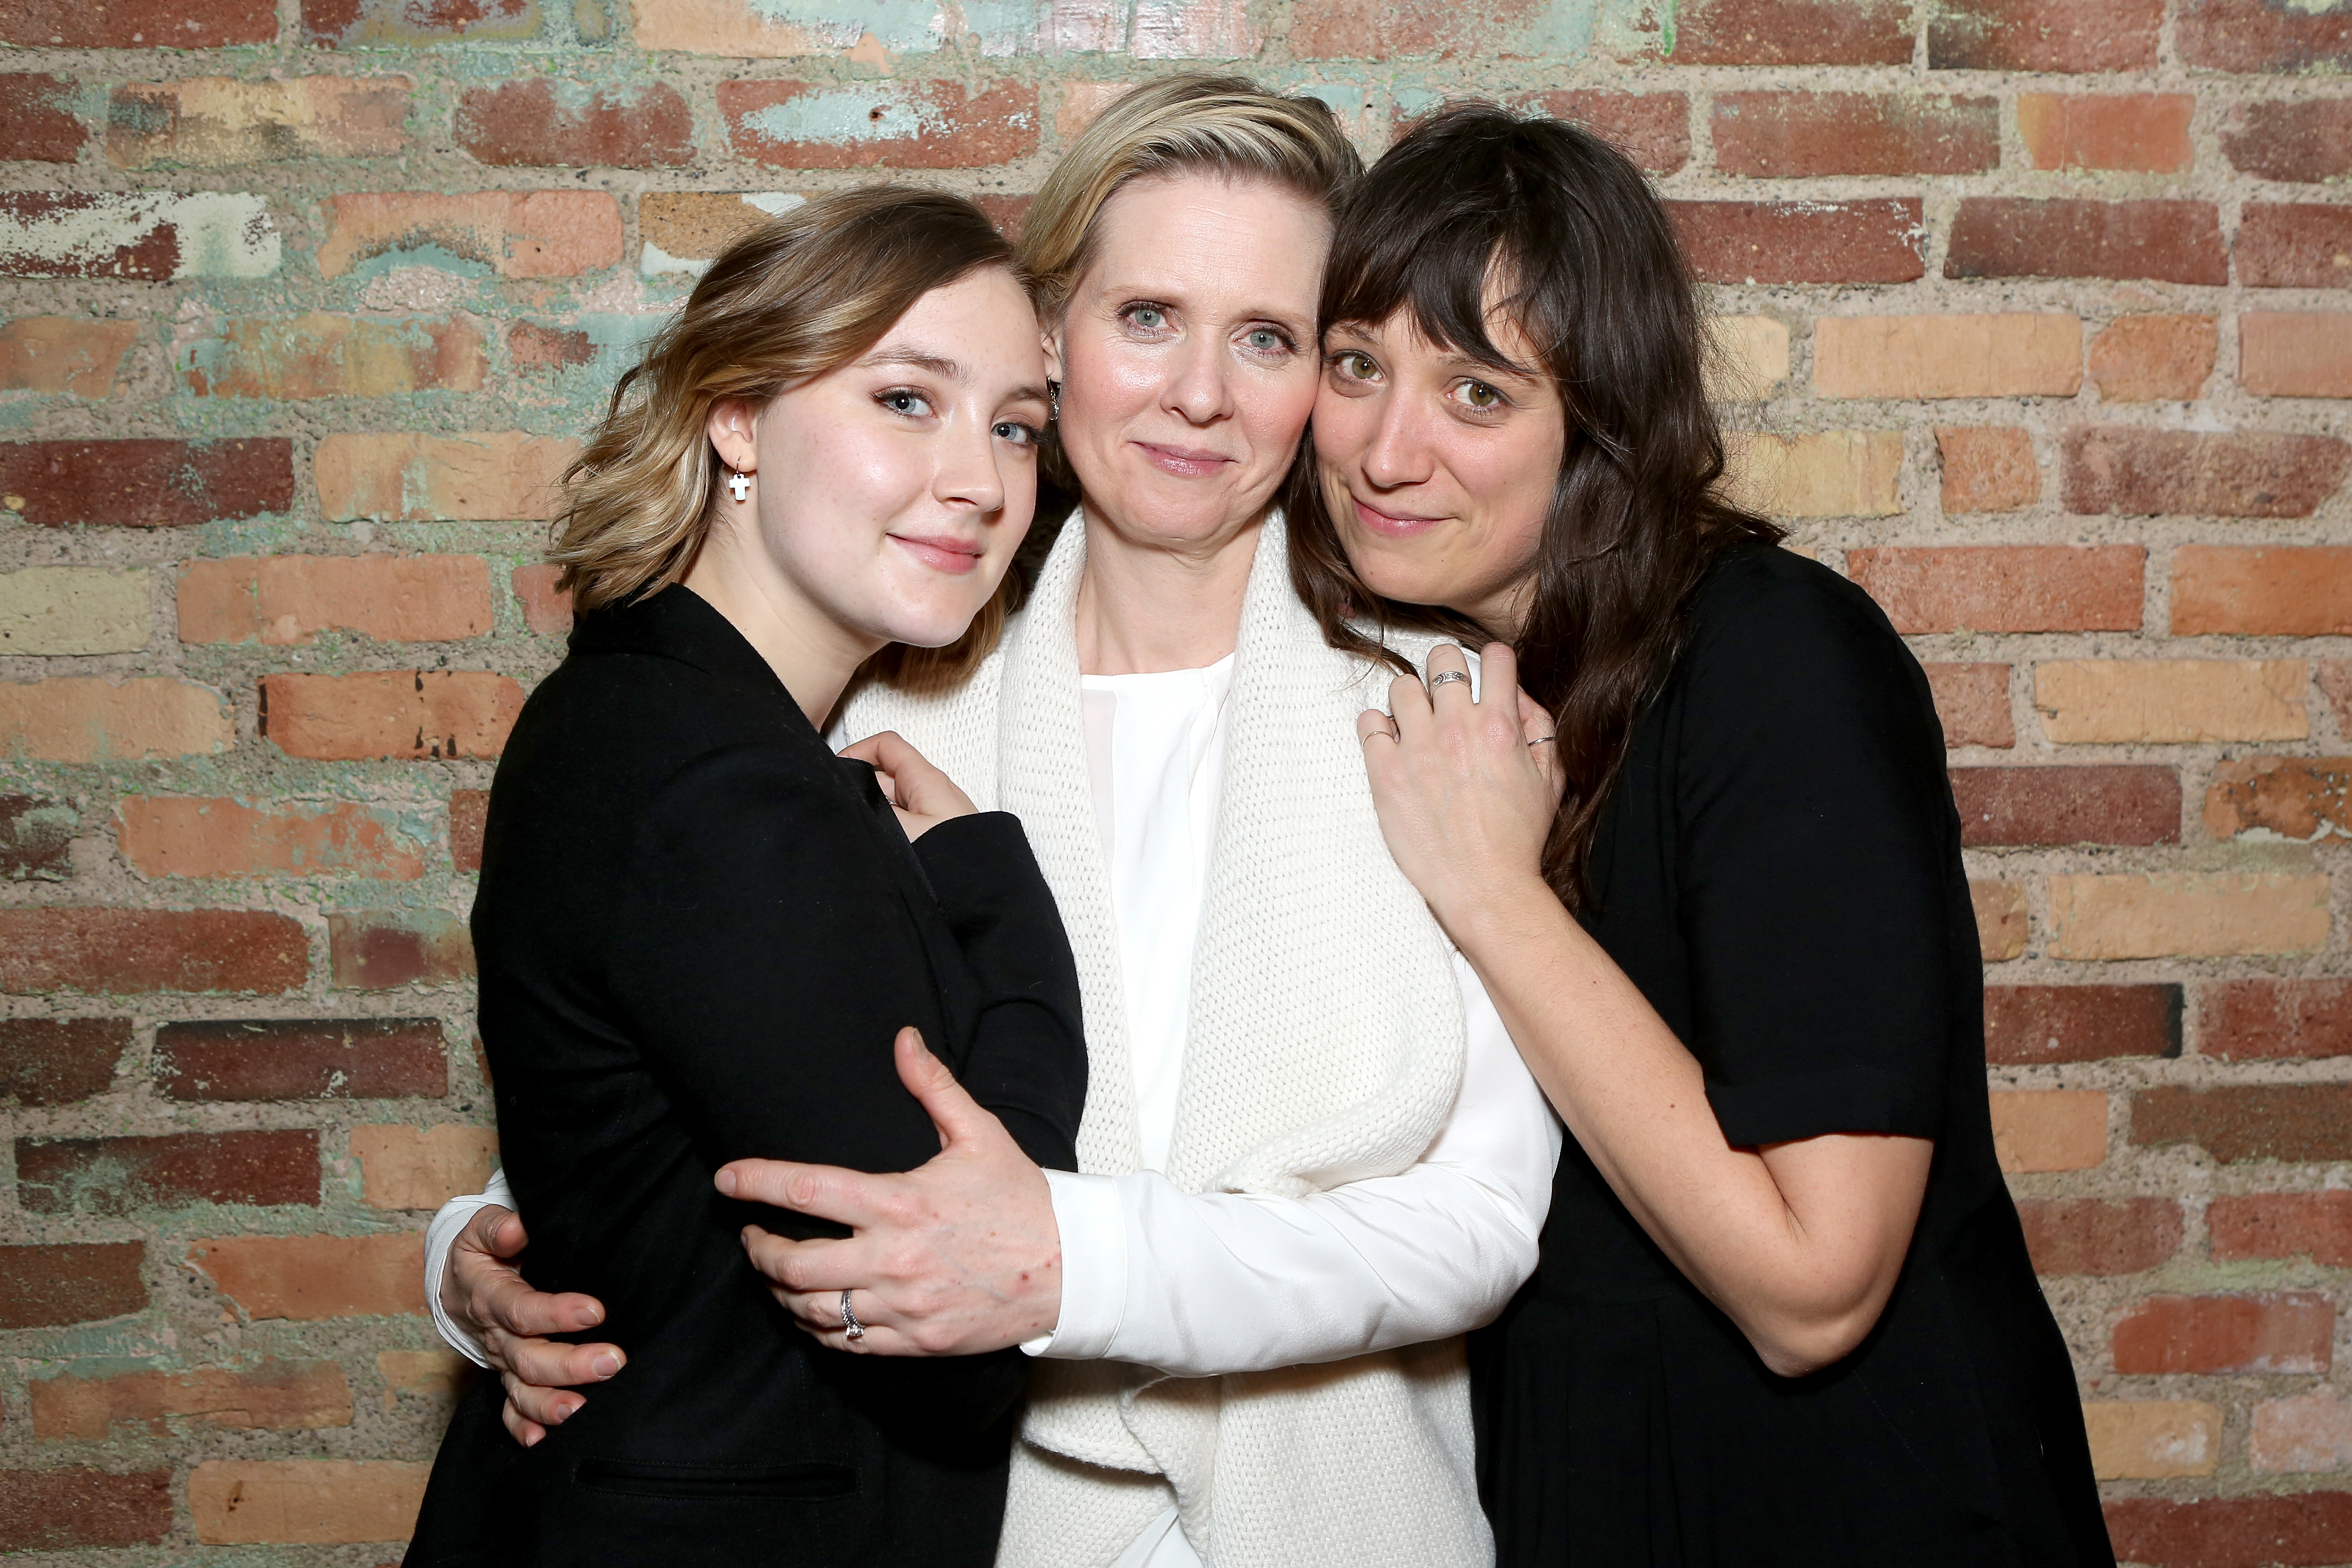 Saoirse Ronan, Cynthia Nixon and Nikole Beckwith attend ChefDance 2015